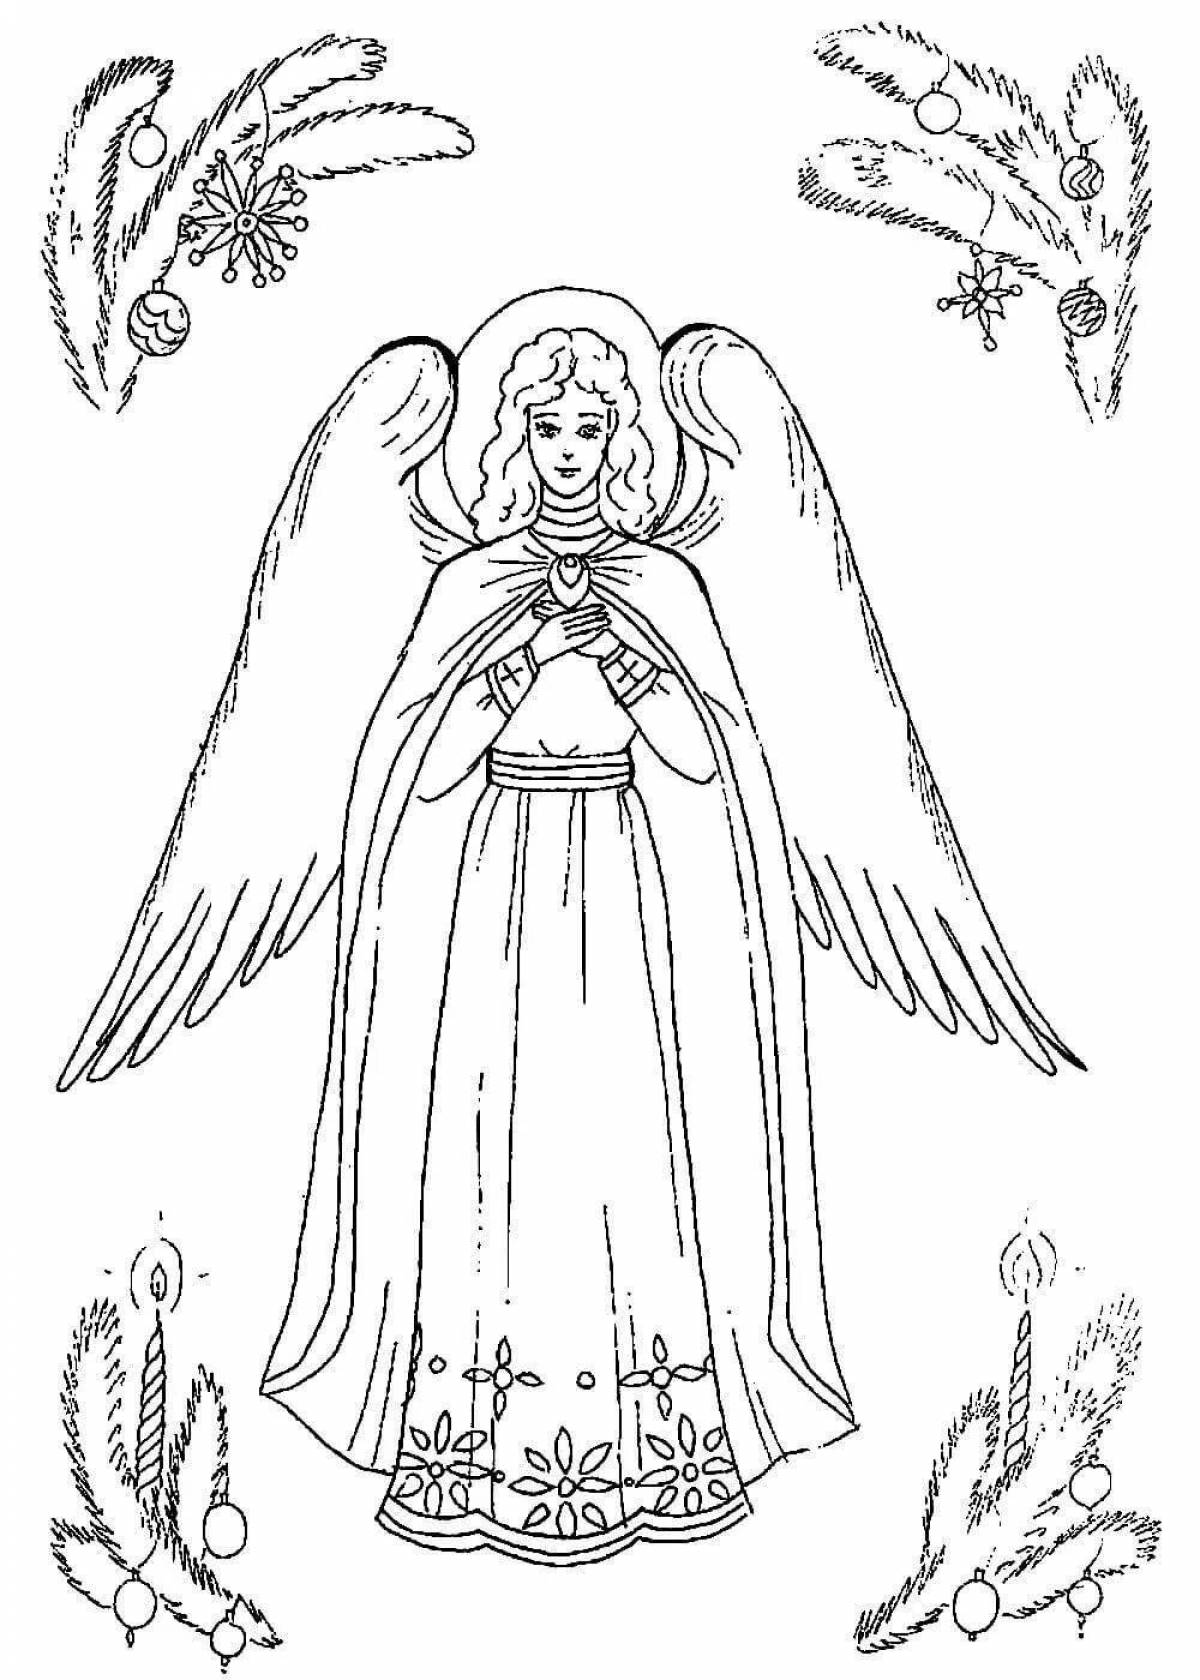 Charming guardian angel coloring book